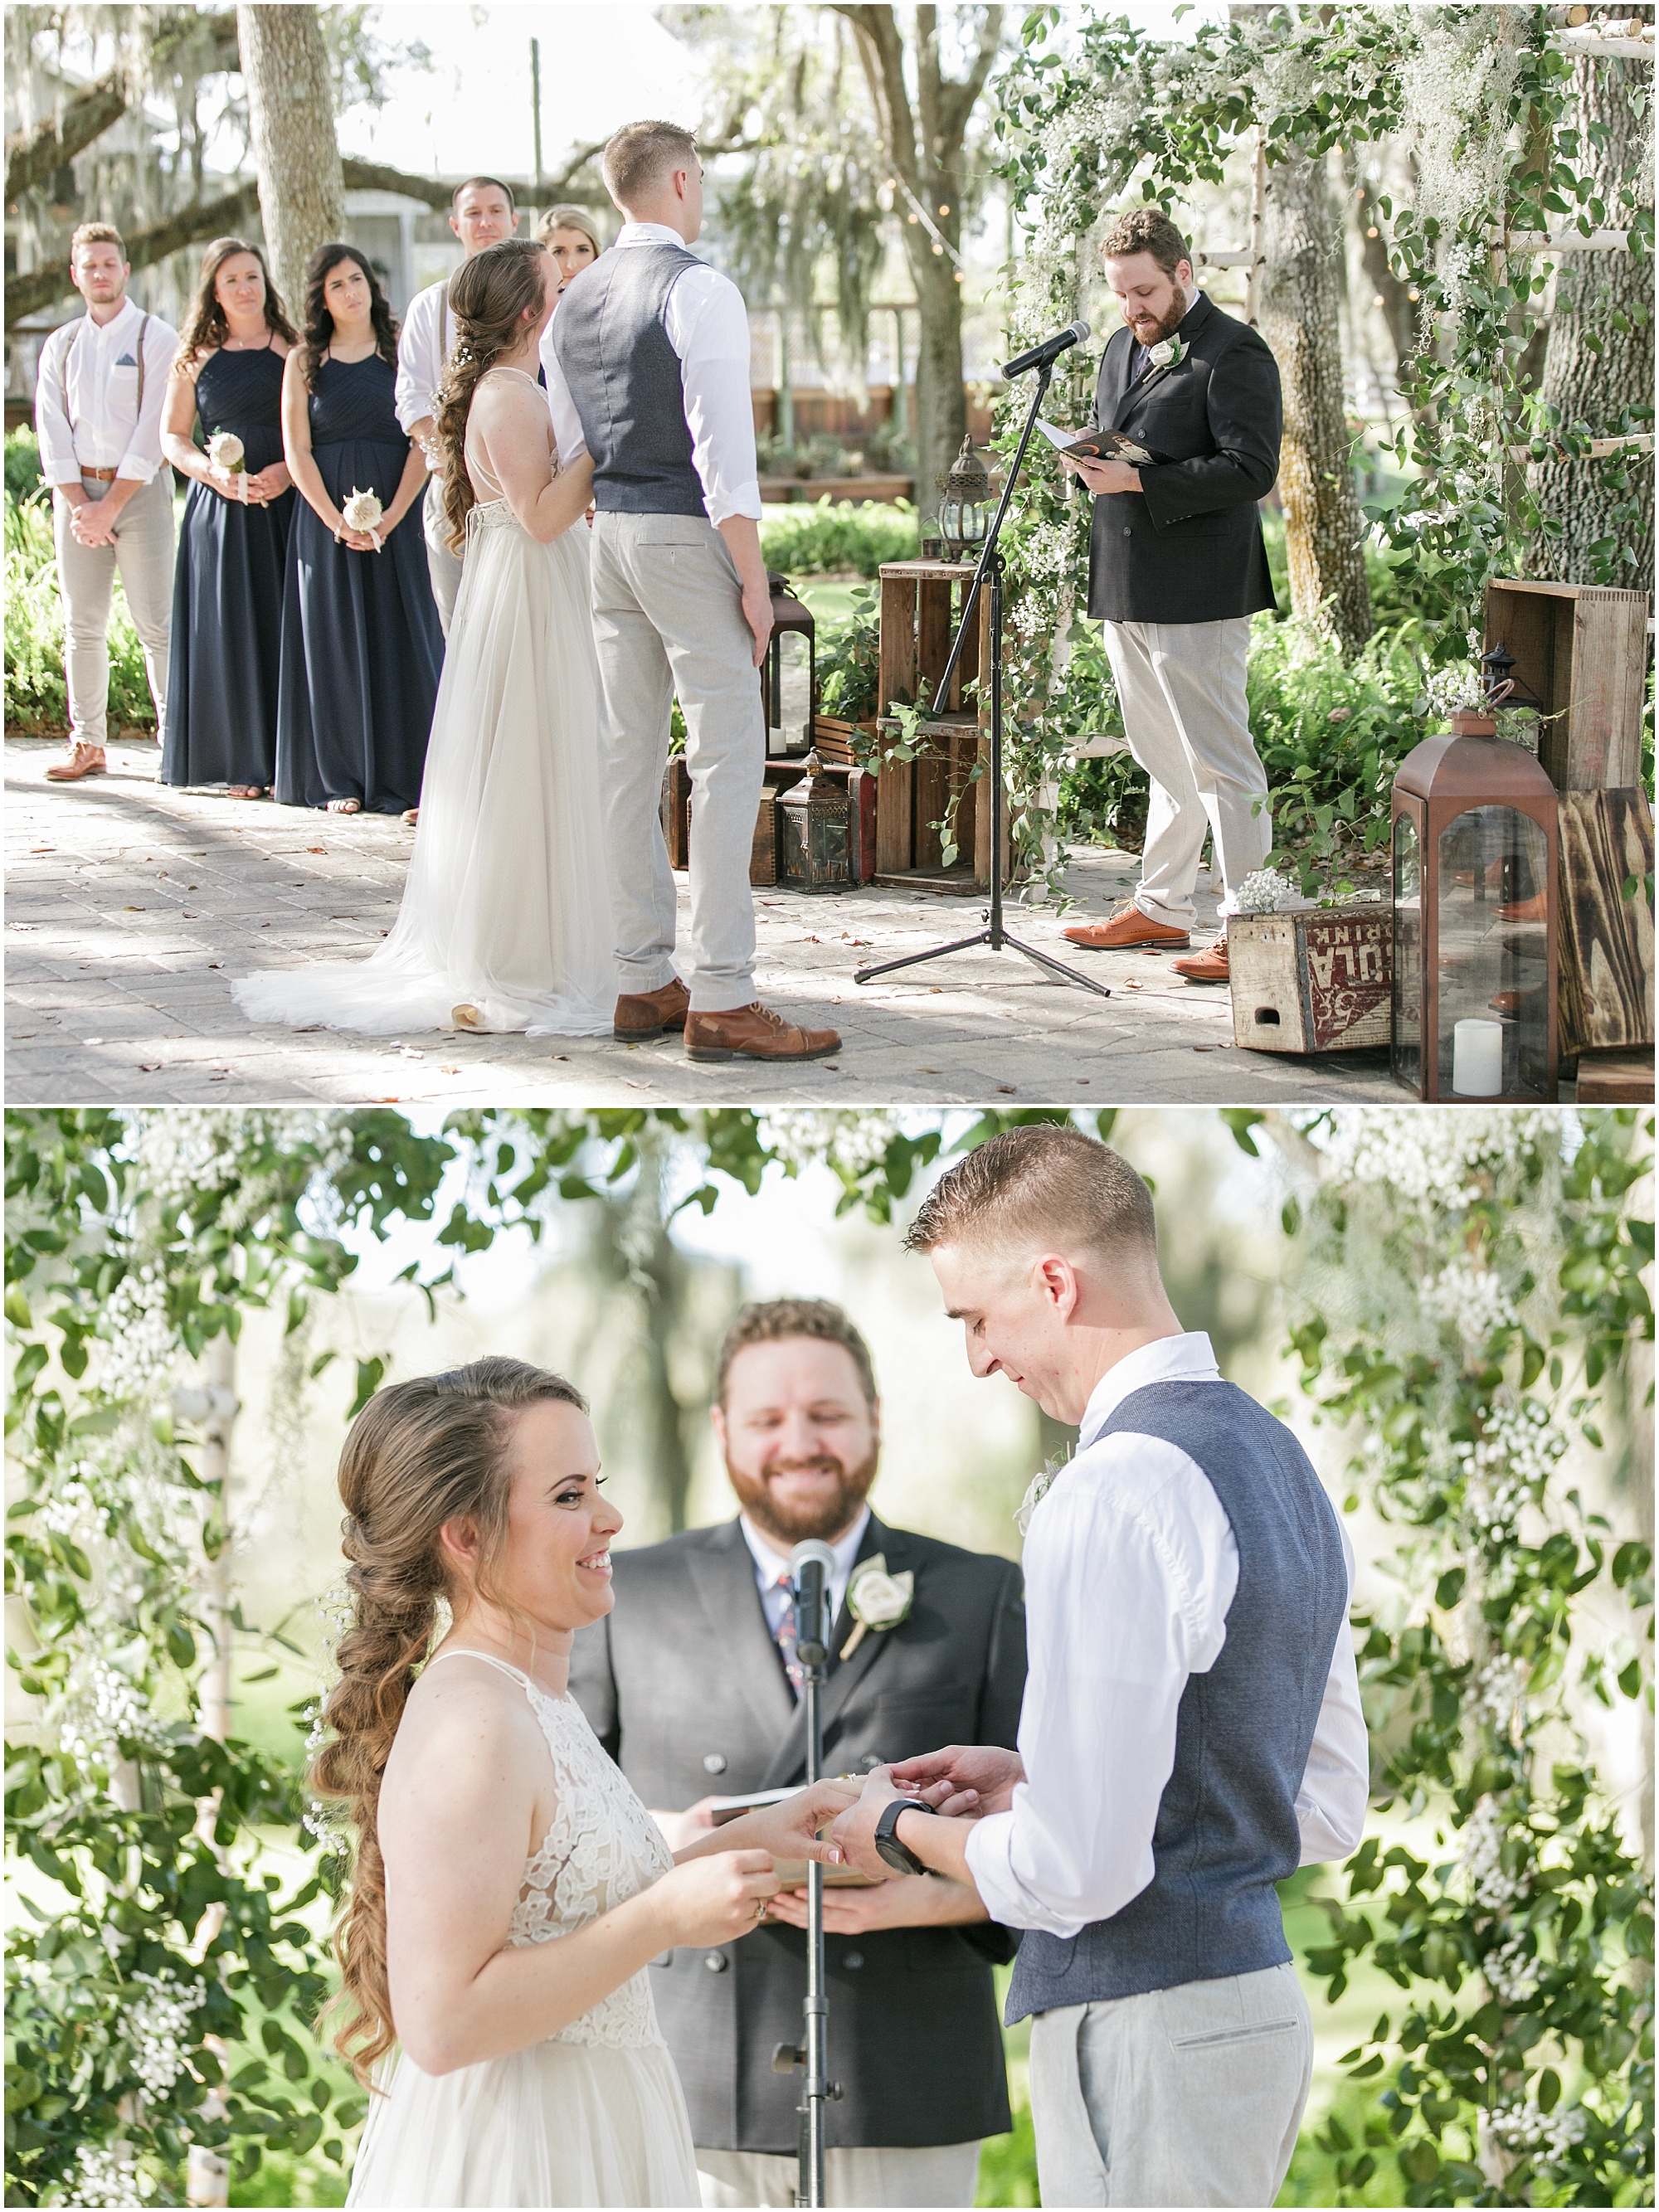 Couple saying their vows to each other at outdoor wedding.